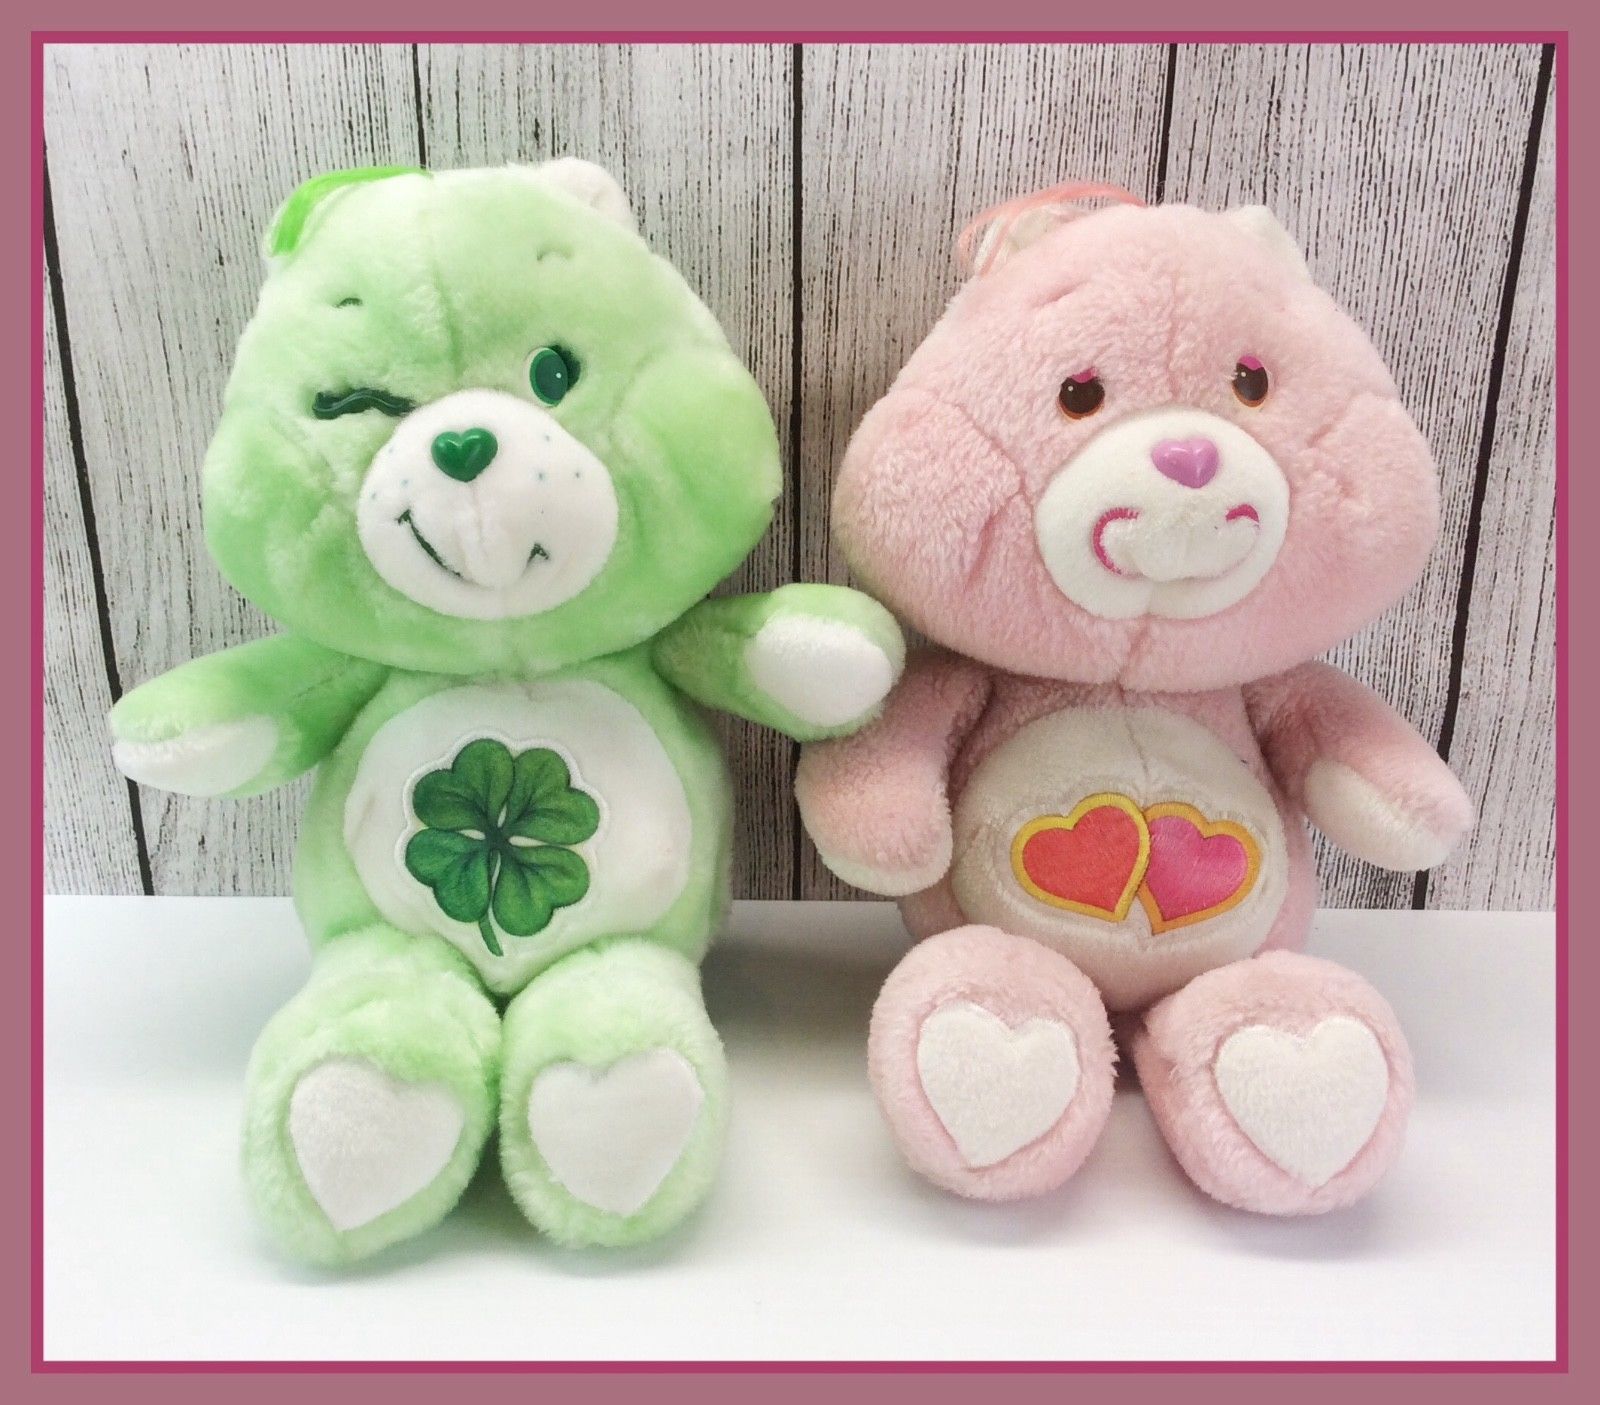 1983 Vintage Kenner Care Bears LOVE A LOT & GOOD LUCK Full Size Plush Animals